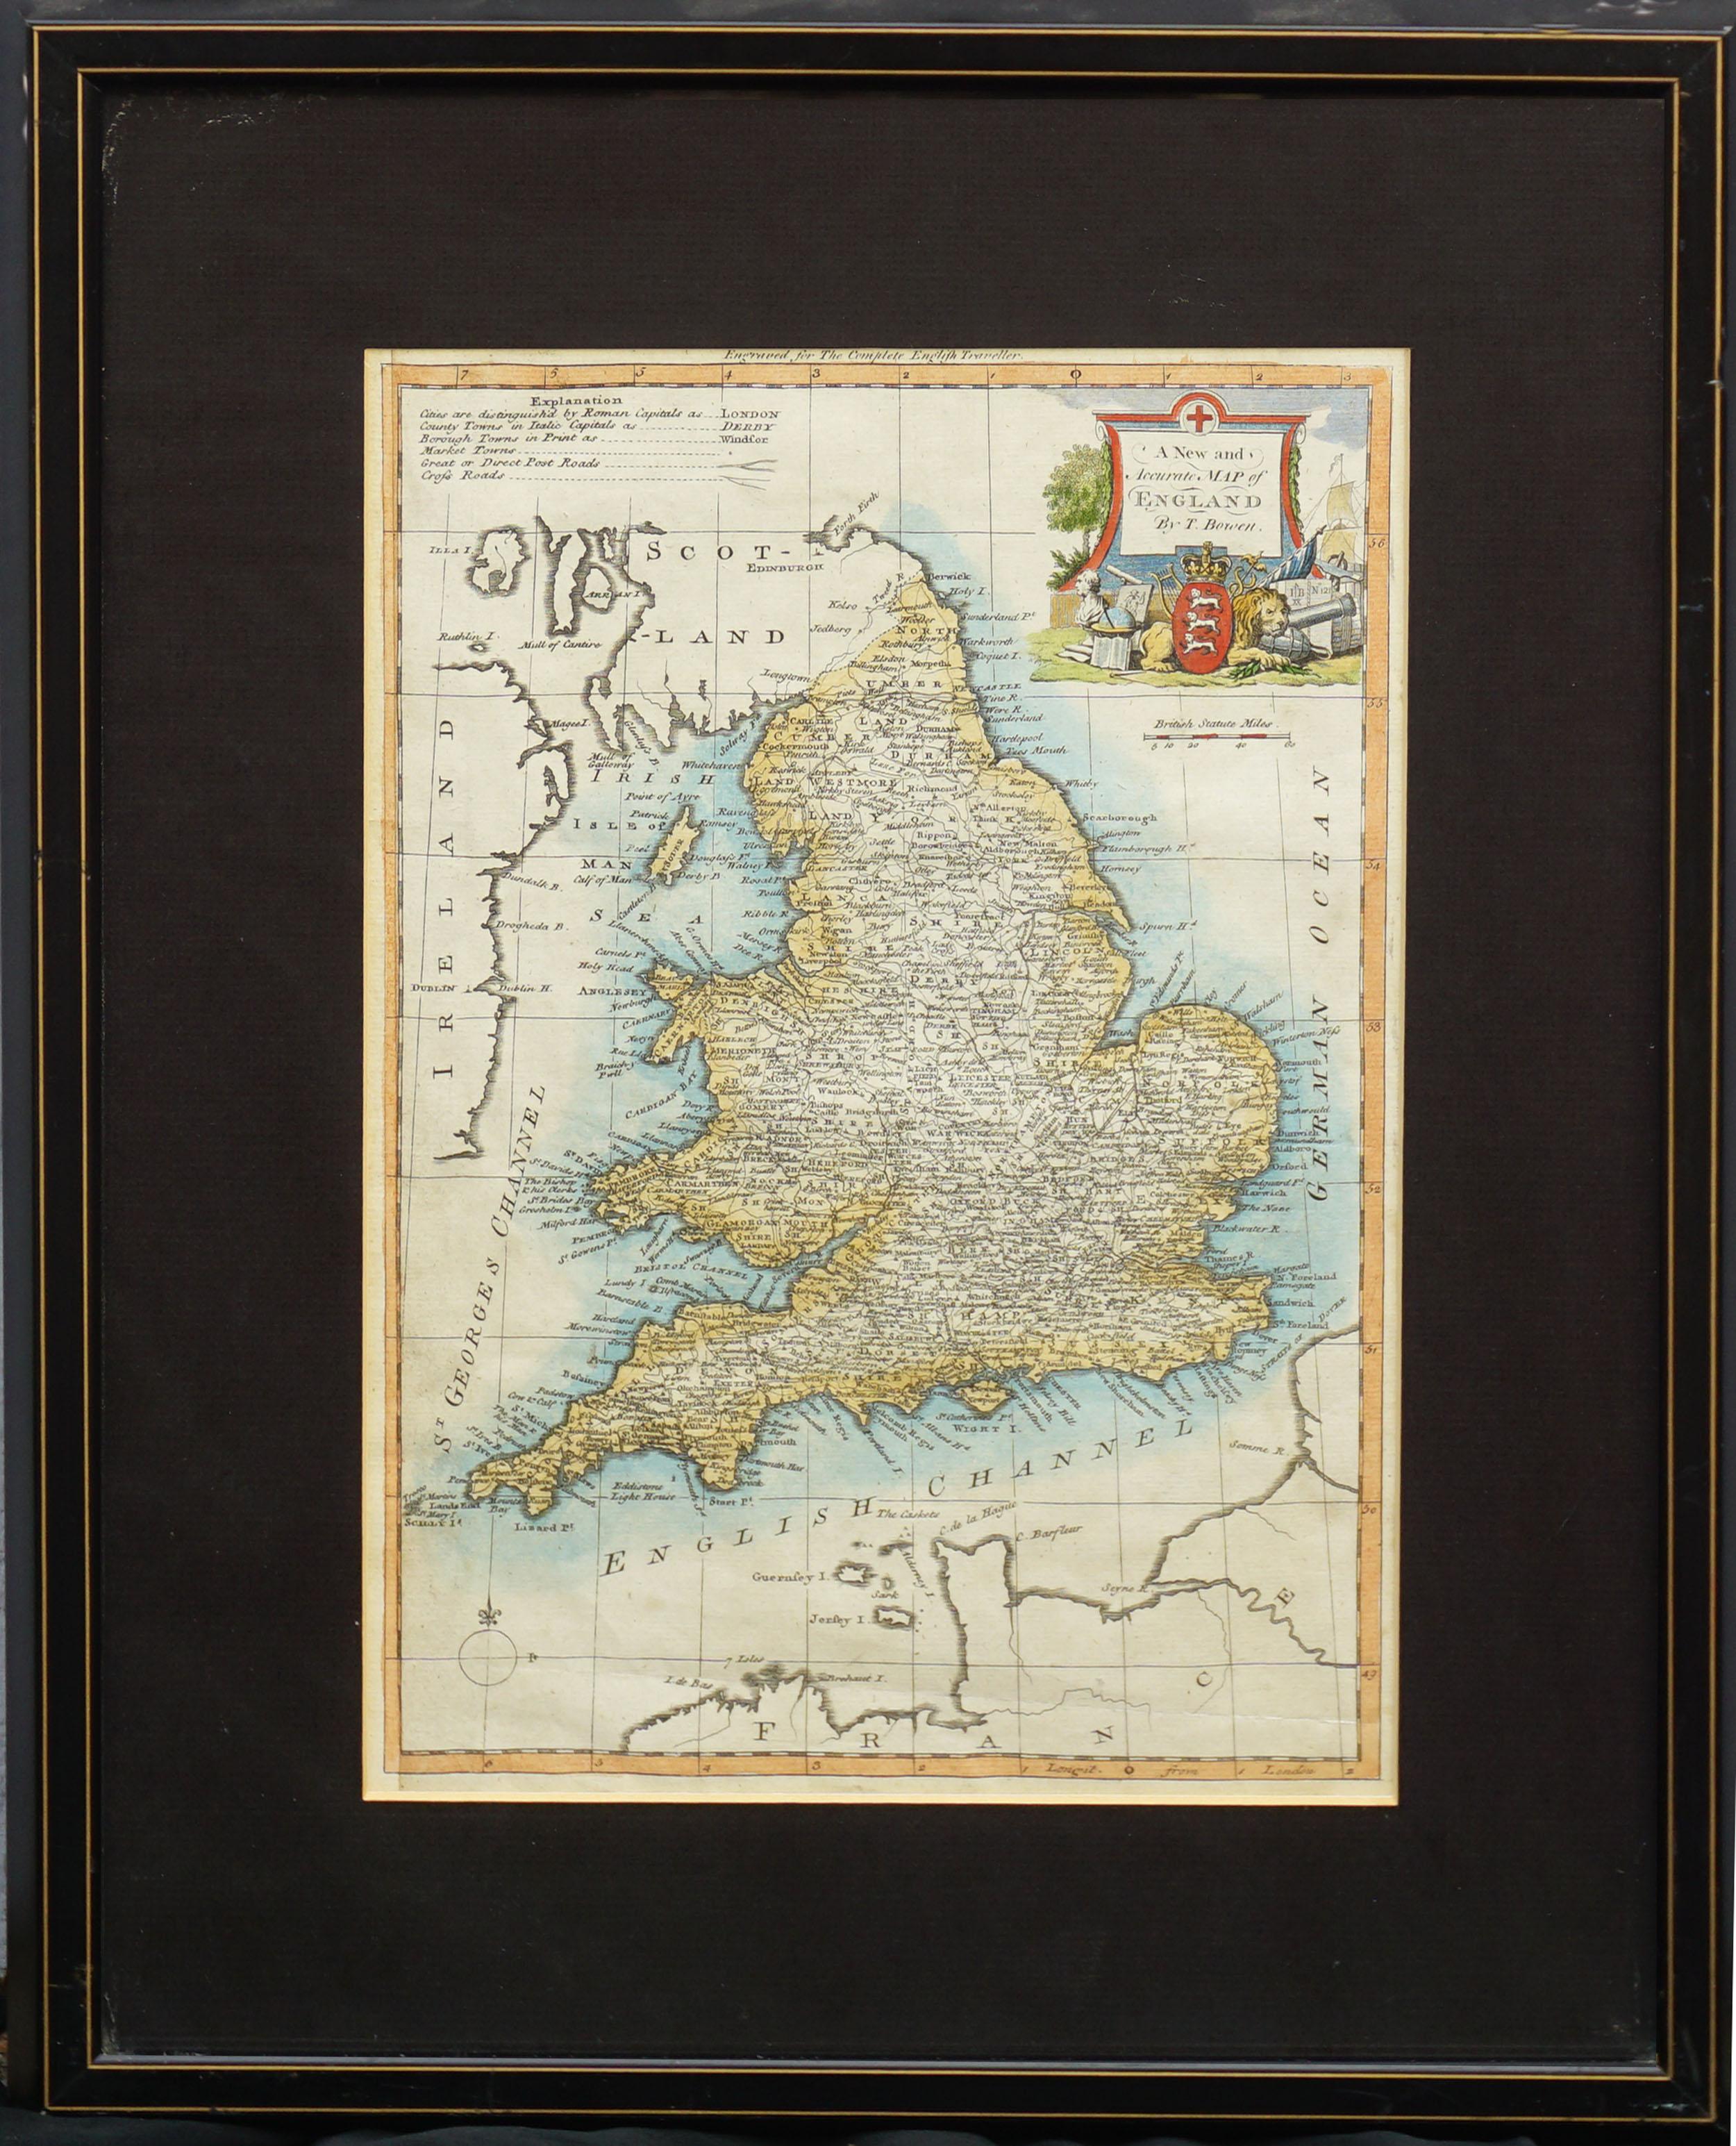 Thomas Bowen Print - 18th Century Accurate Map of England